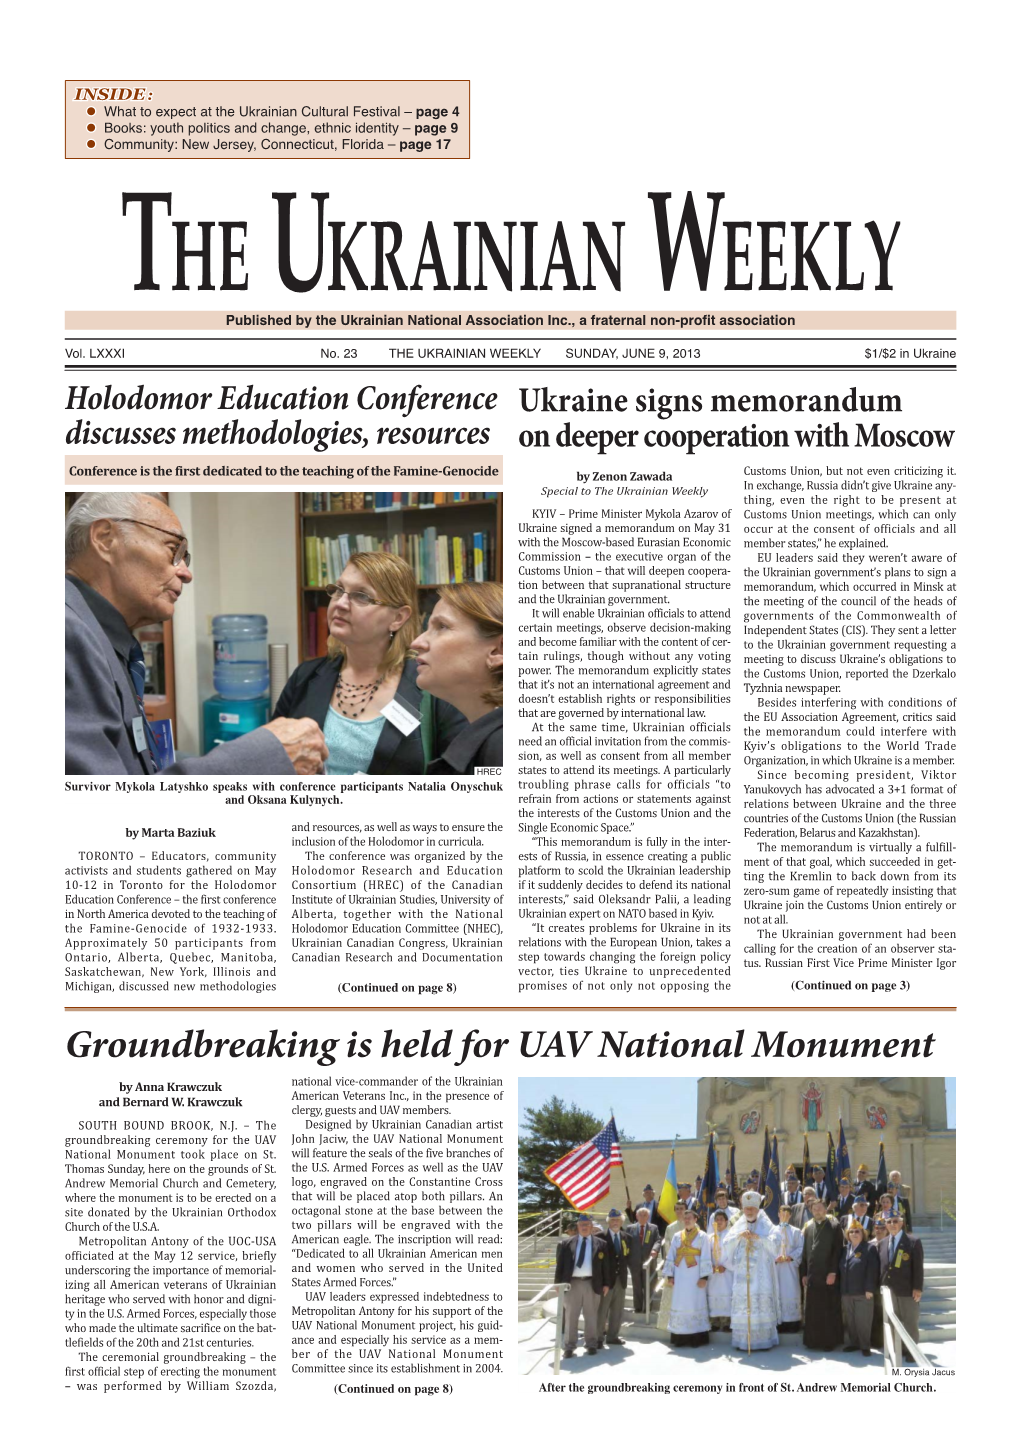 Groundbreaking Is Held for UAV National Monument by Anna Krawczuk National Vice-Commander of the Ukrainian American Veterans Inc., in the Presence of and Bernard W